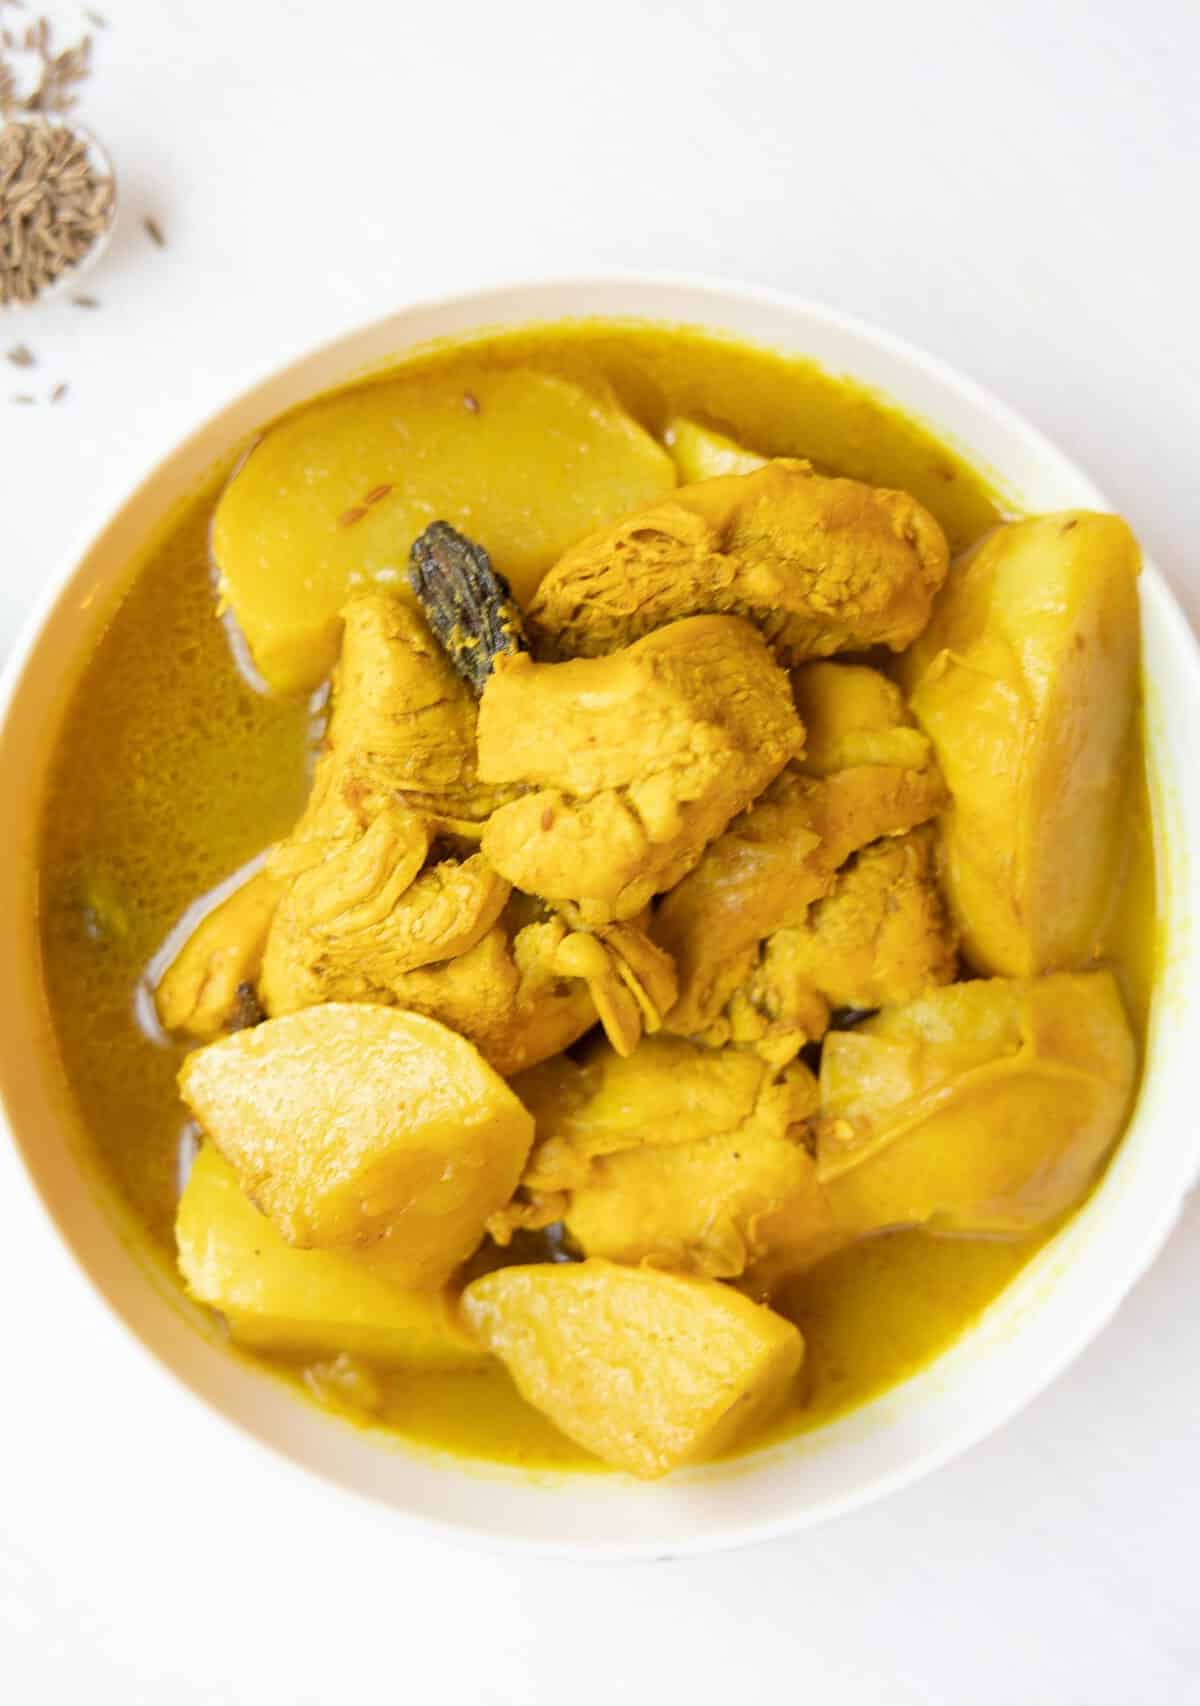  The curry seasoning is a perfect blend of sweet, savory and spicy.